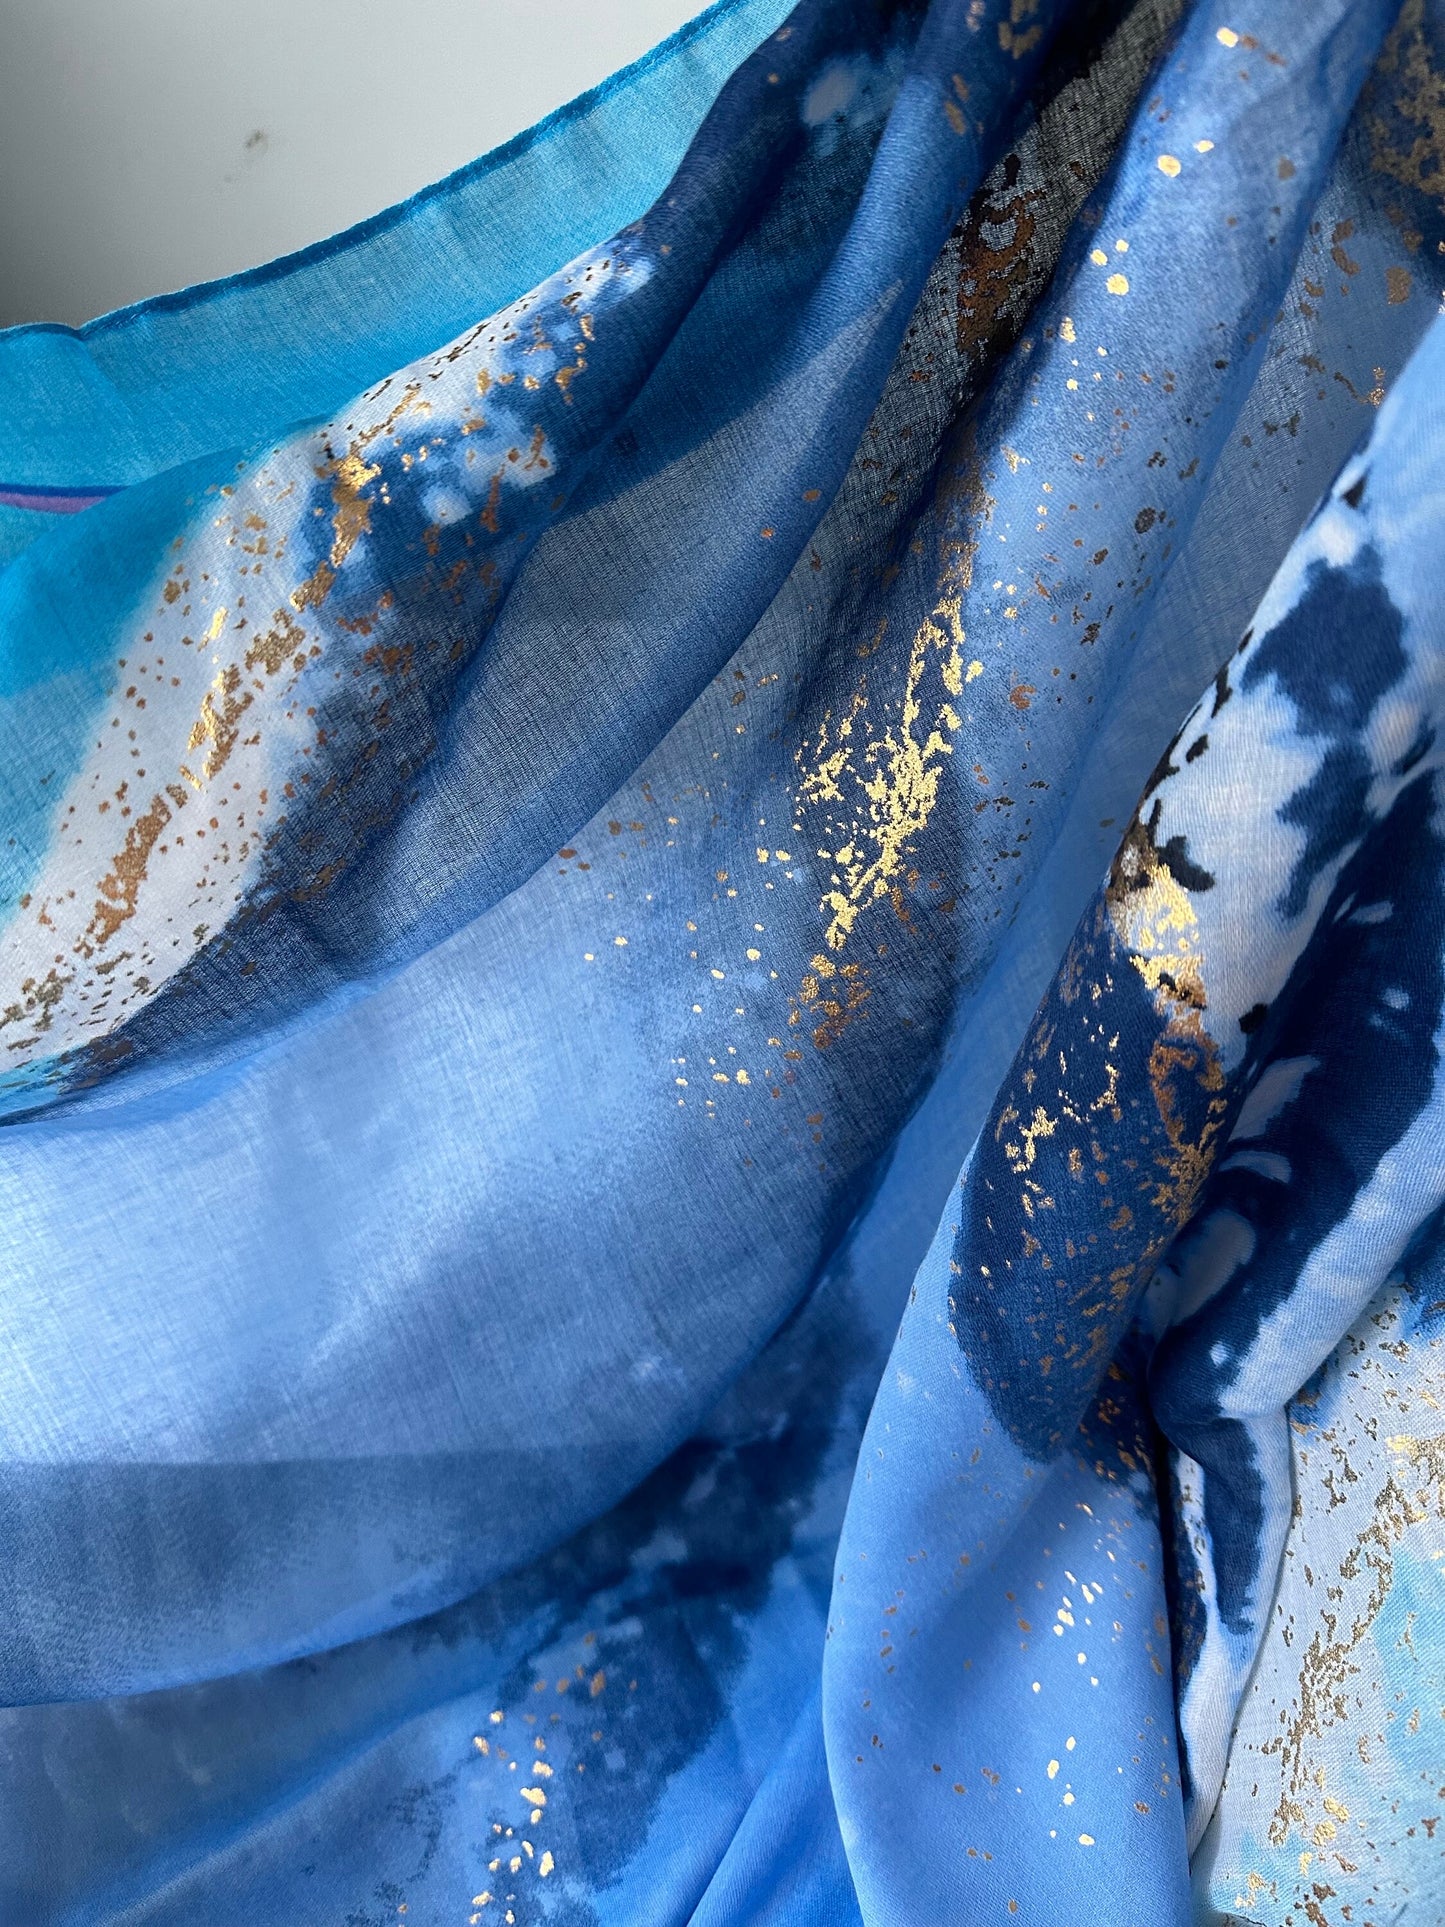 Watercolours Pattern Gold Dusk Blue Cotton Blend Scarf/Summer Autumn Scarf/Scarf Women/Gift For Her Birthday Christmas/Gifts For Mum